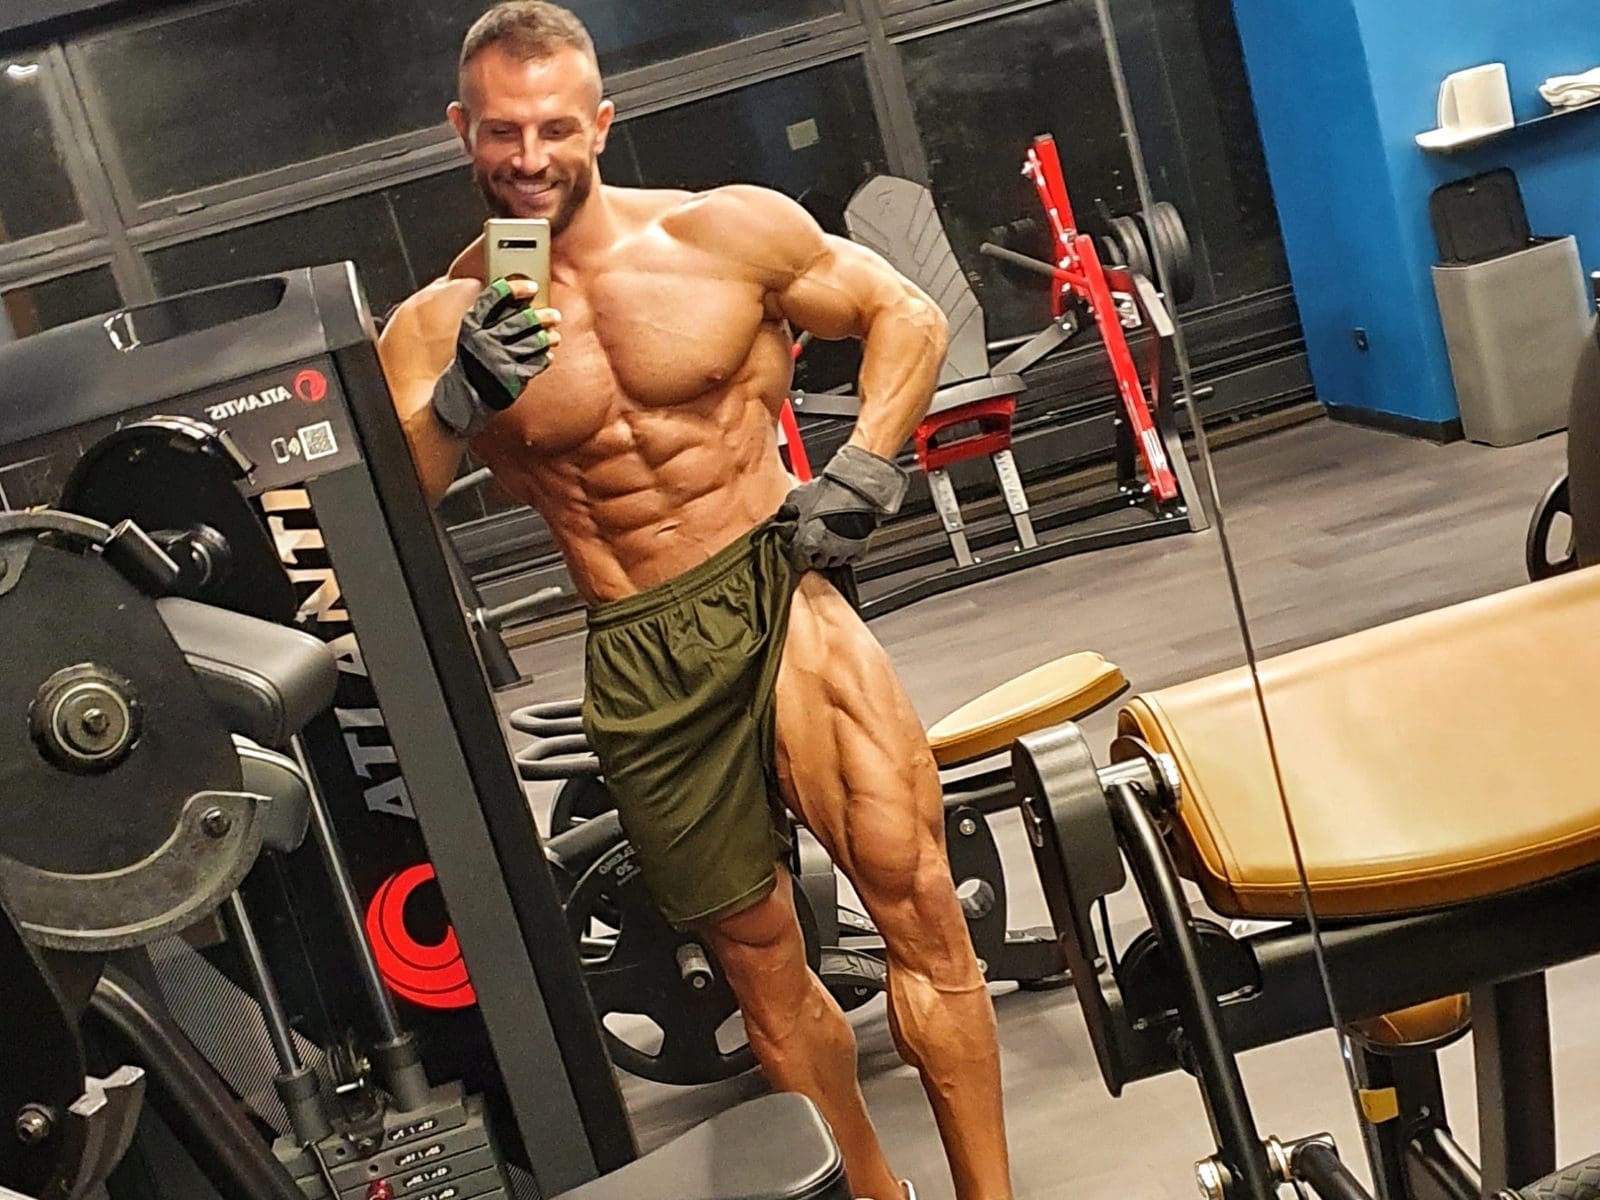 Bodybuilder Charming Joshua is the Muscle Dominator